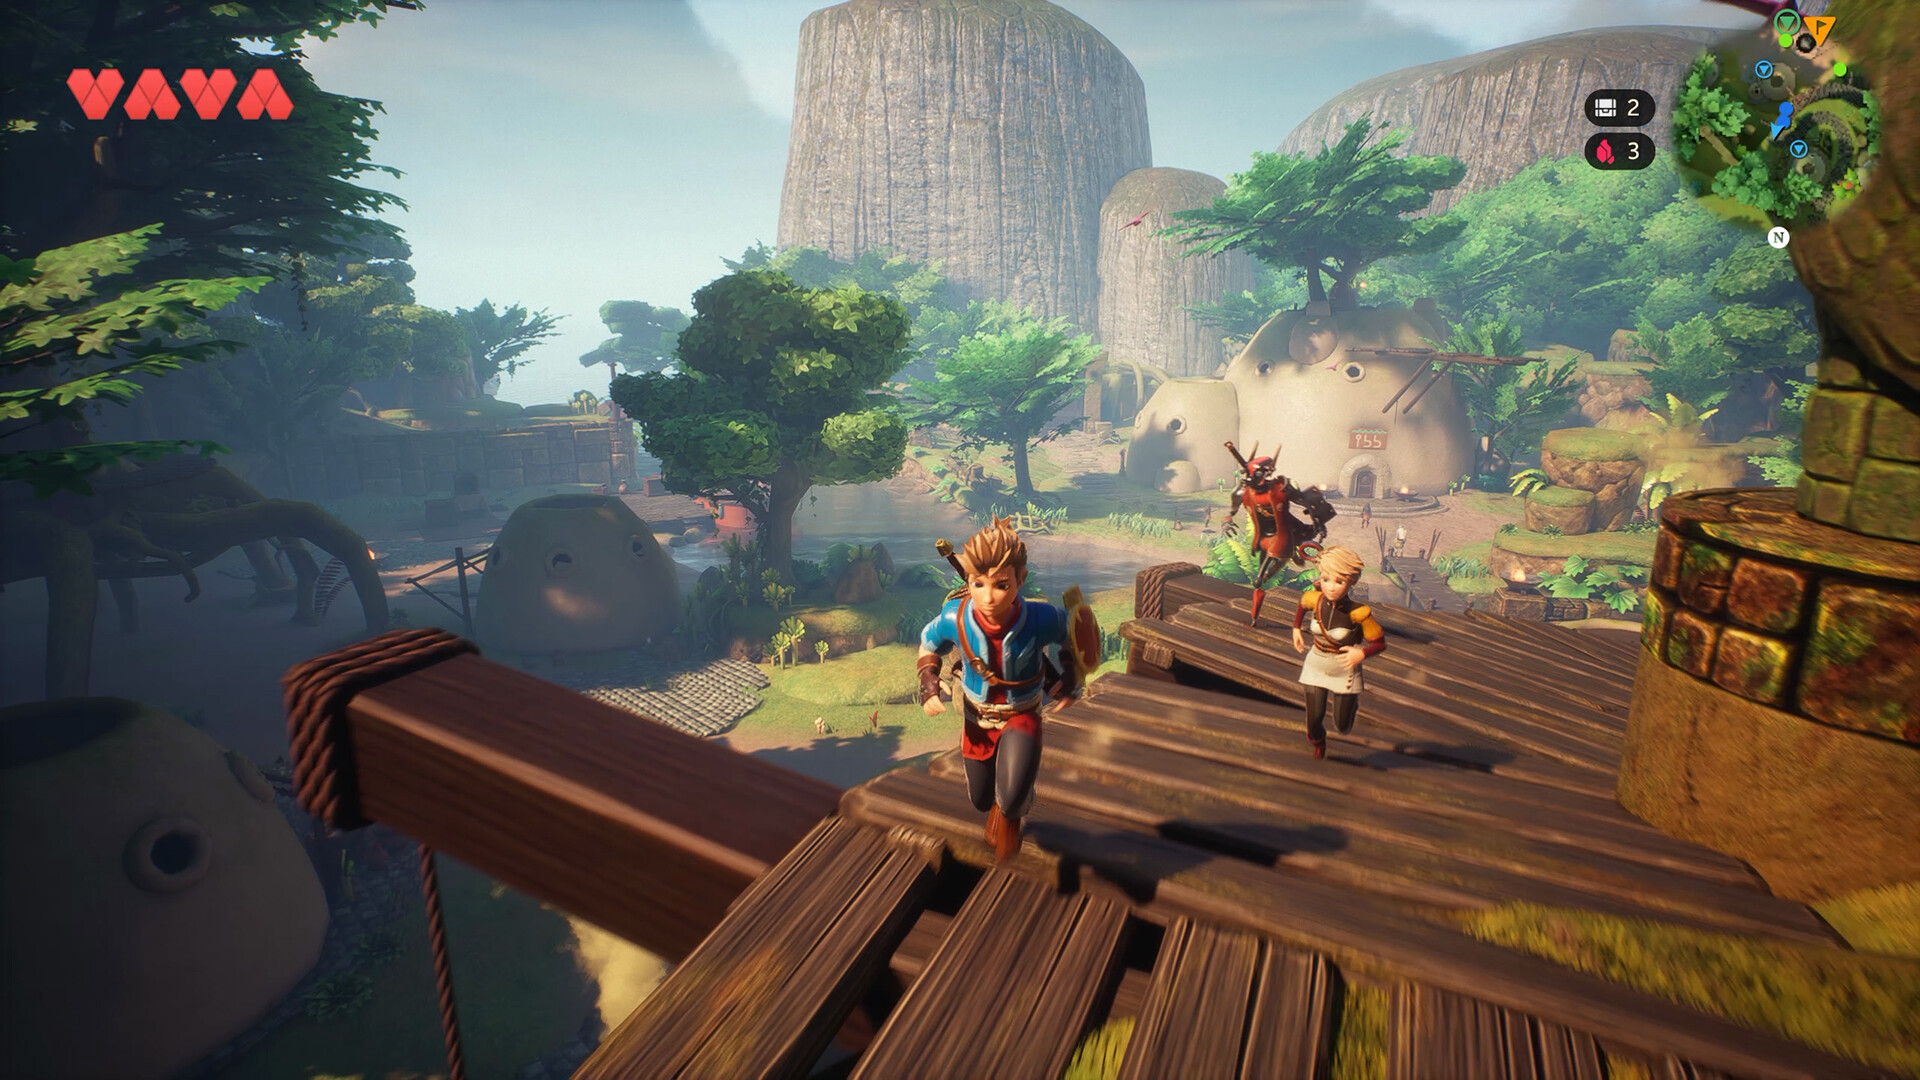 Oceanhorn 2: Knights Of The Lost Realm AR XBOX One / Xbox Series X,S CD Key